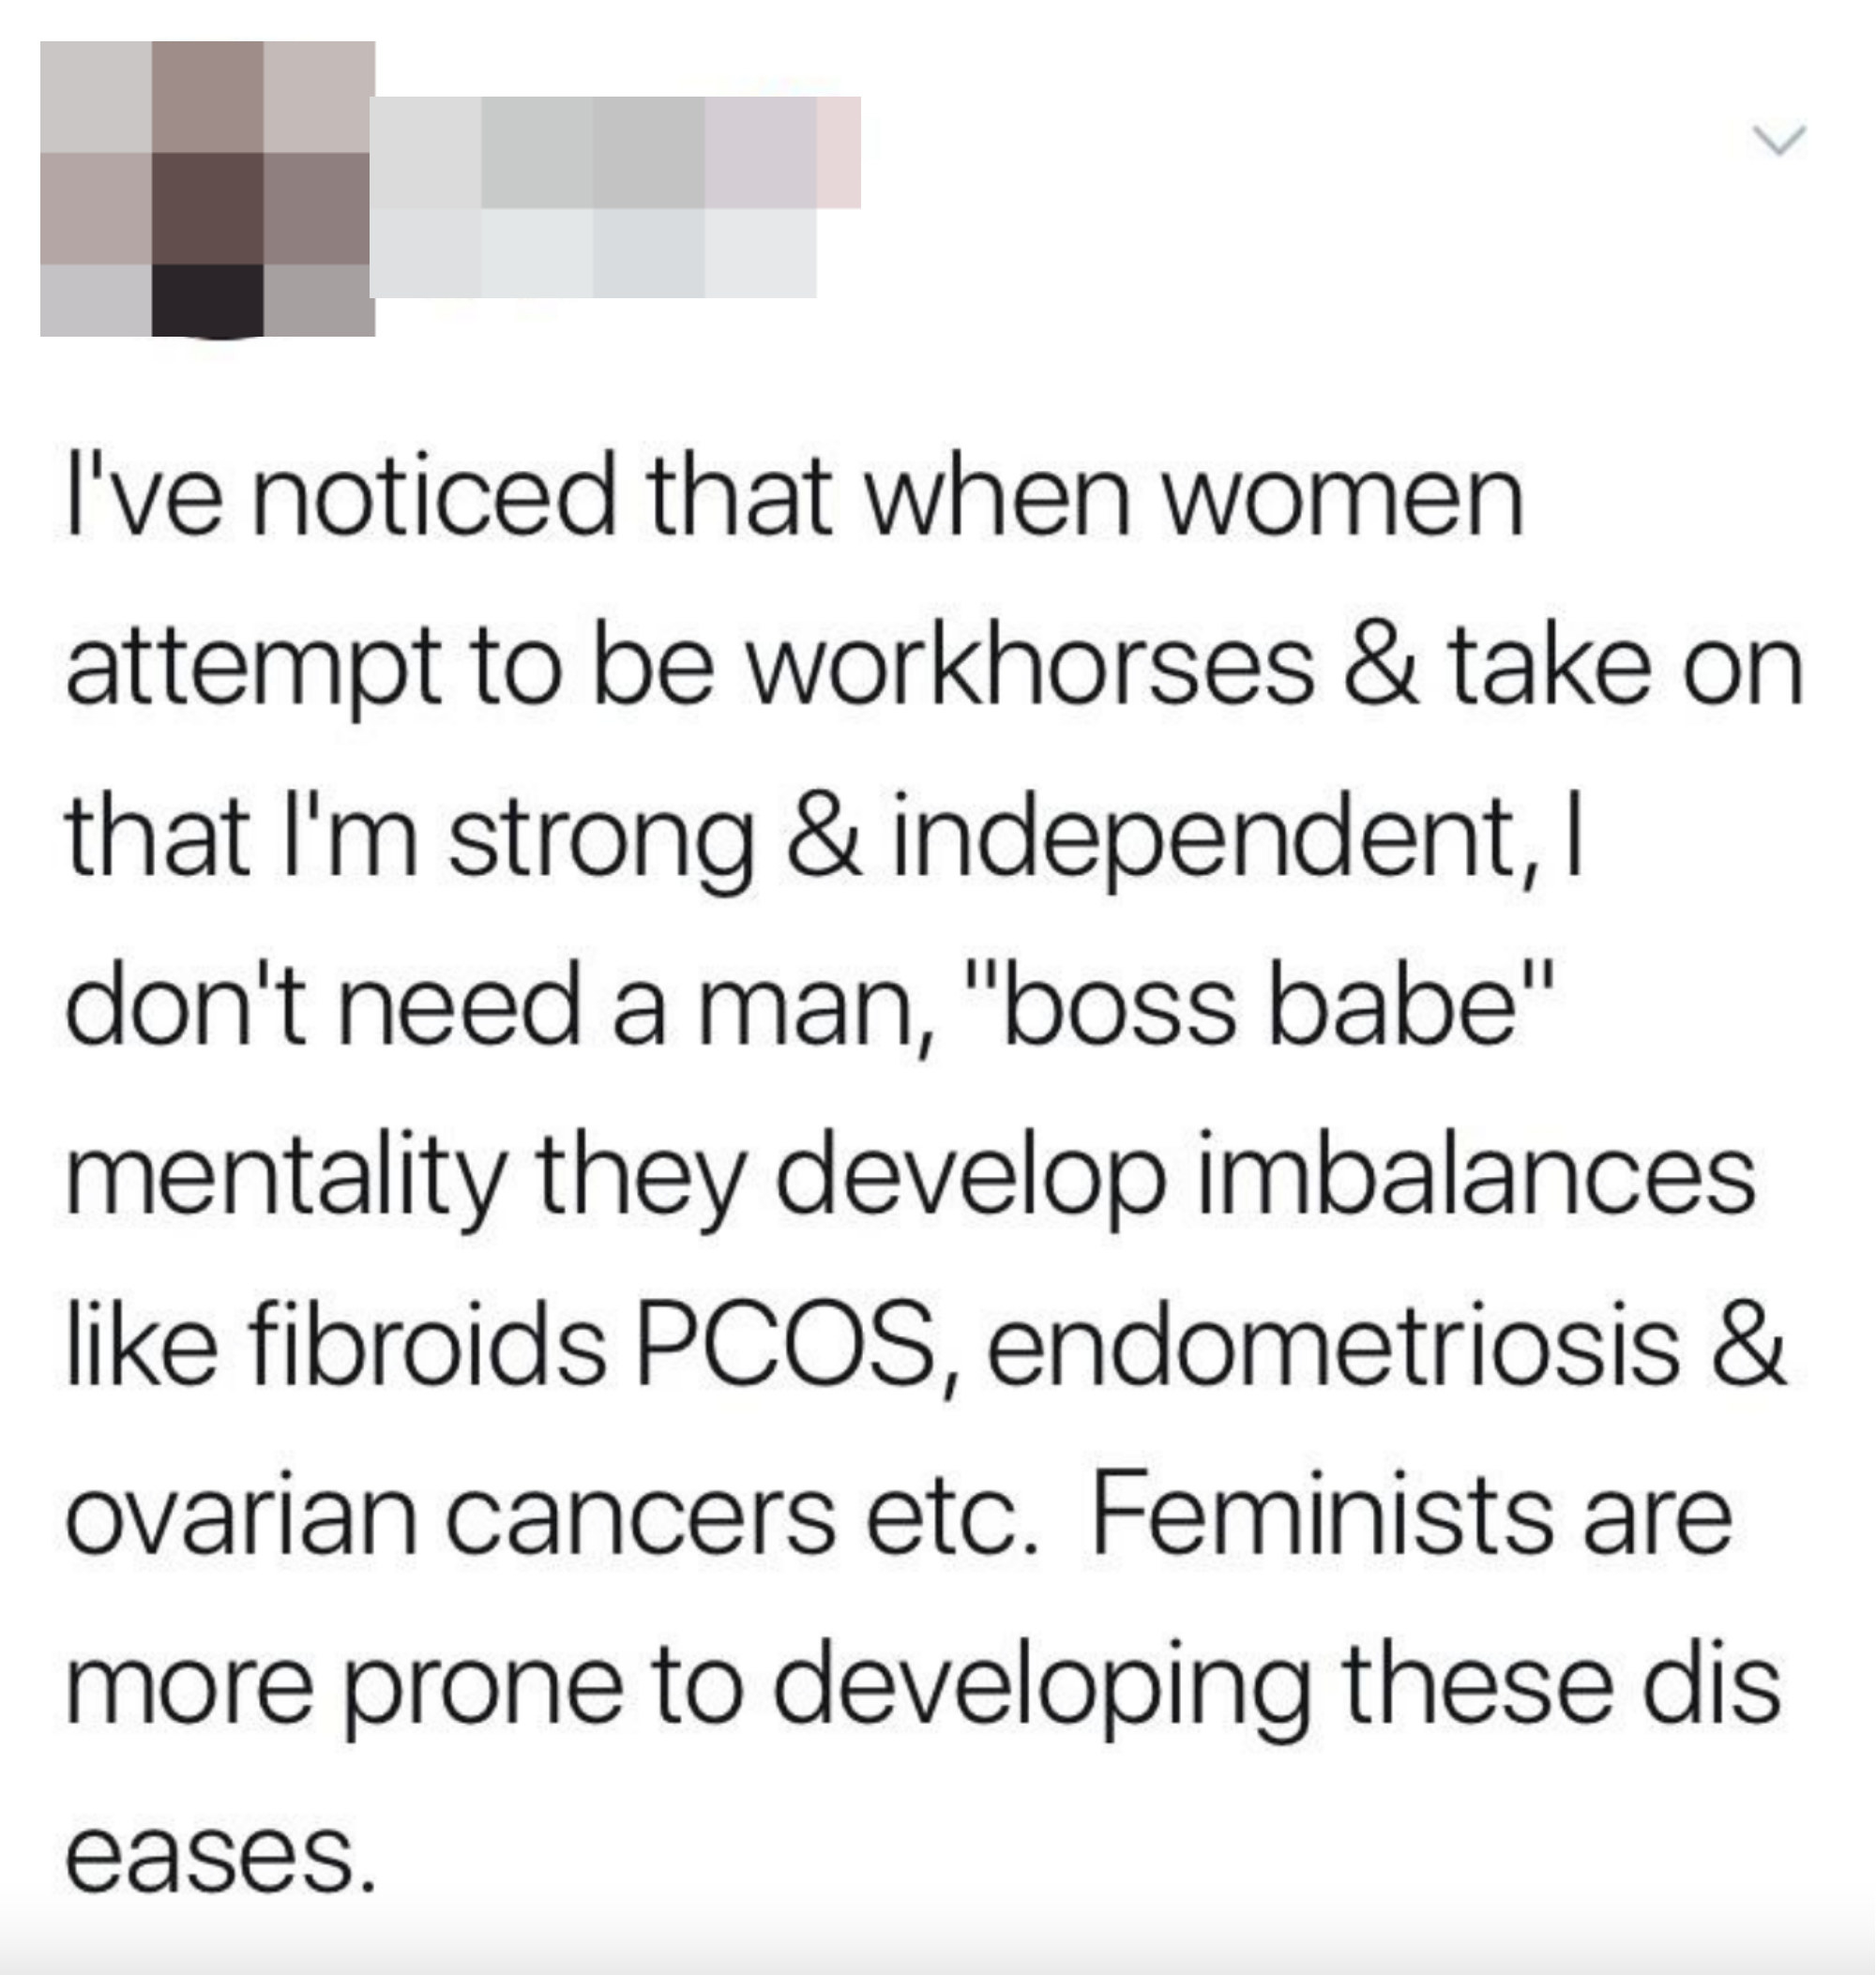 &quot;Feminists are more prone to developing these diseases&quot;